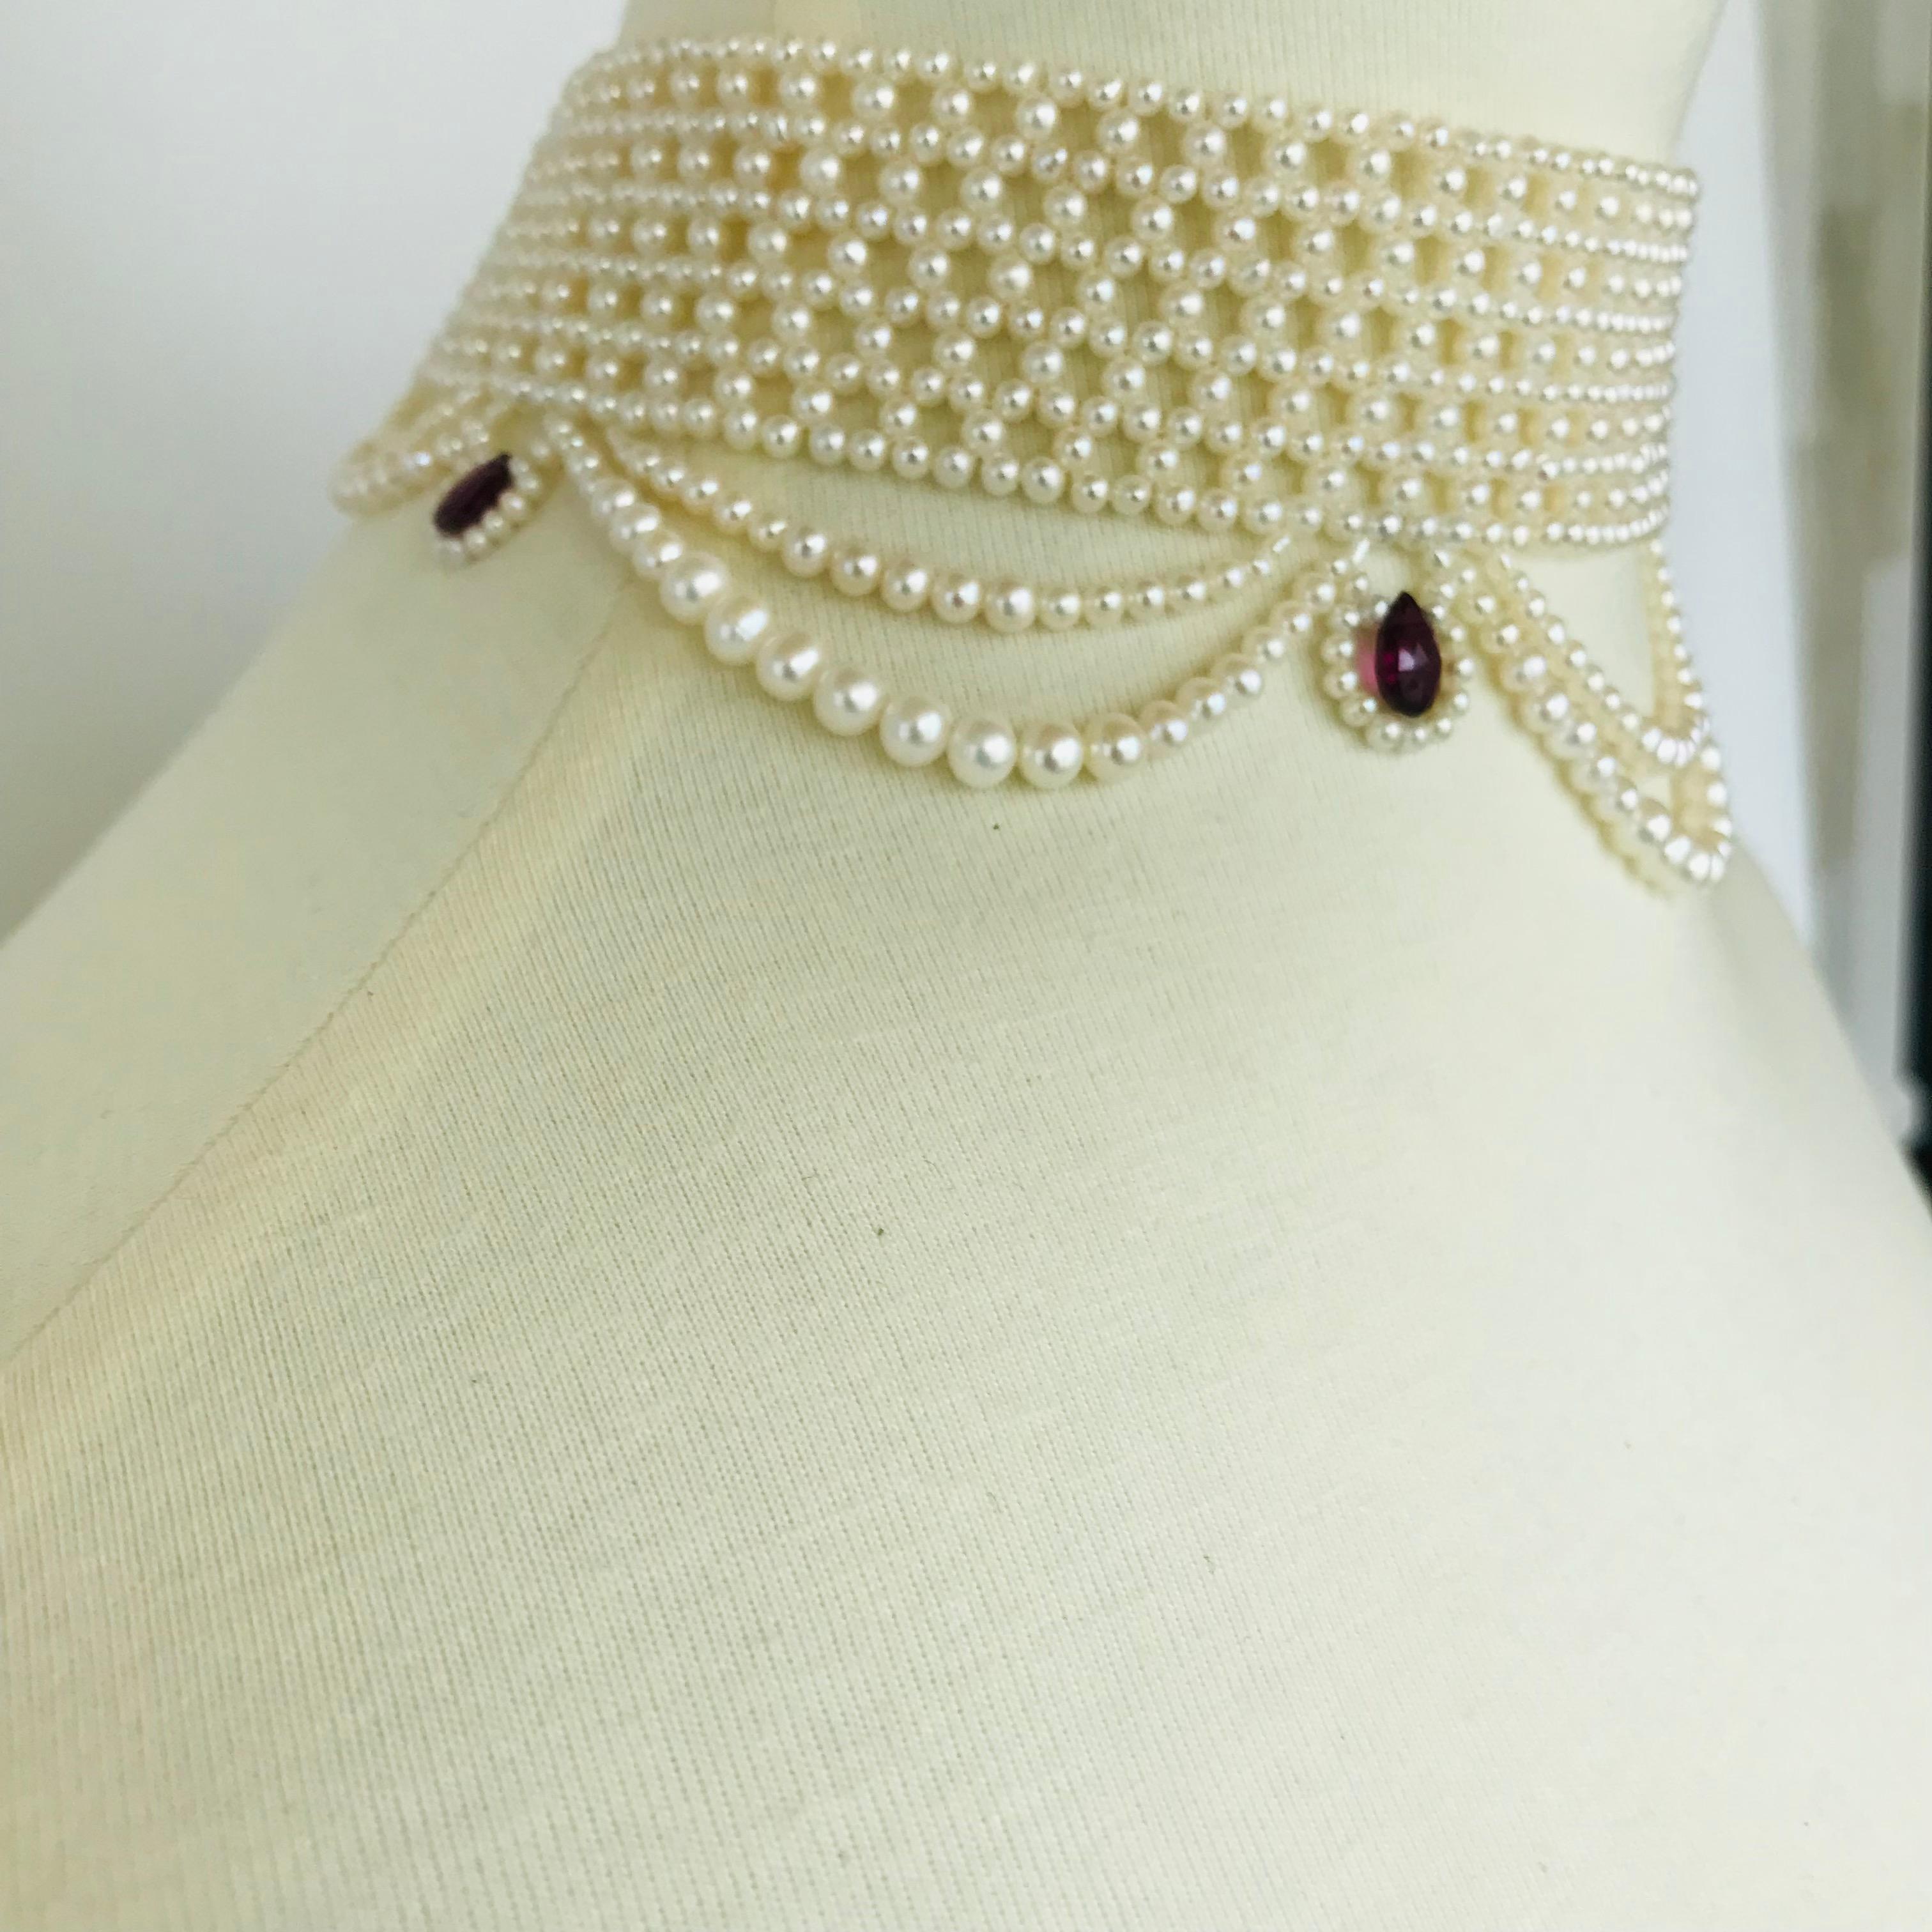 Women's or Men's Marina J Woven Pearl Choker with Pearl Drapes, Garnet Briolettes and 14 K Gold